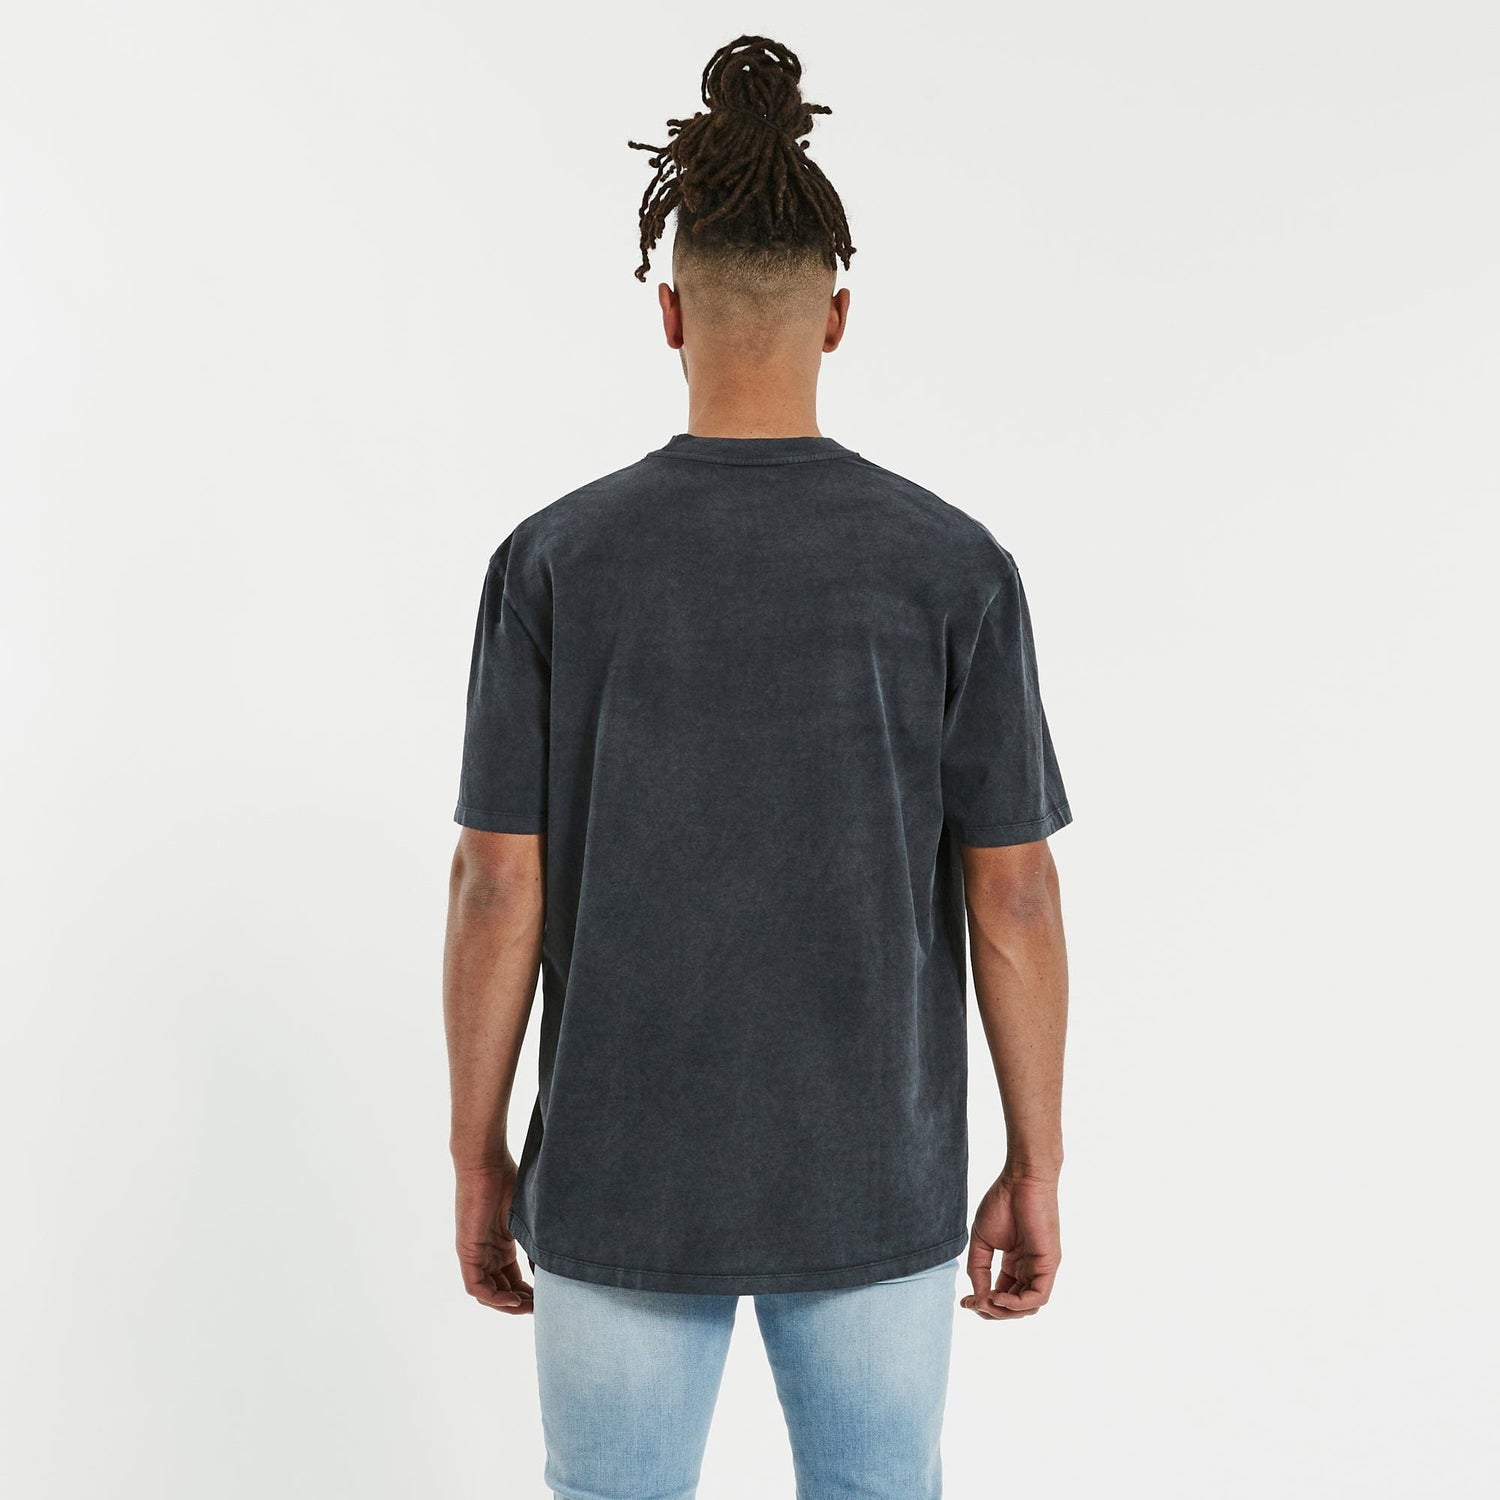 Back to Back Box Fit Scoop T-Shirt Mineral Black